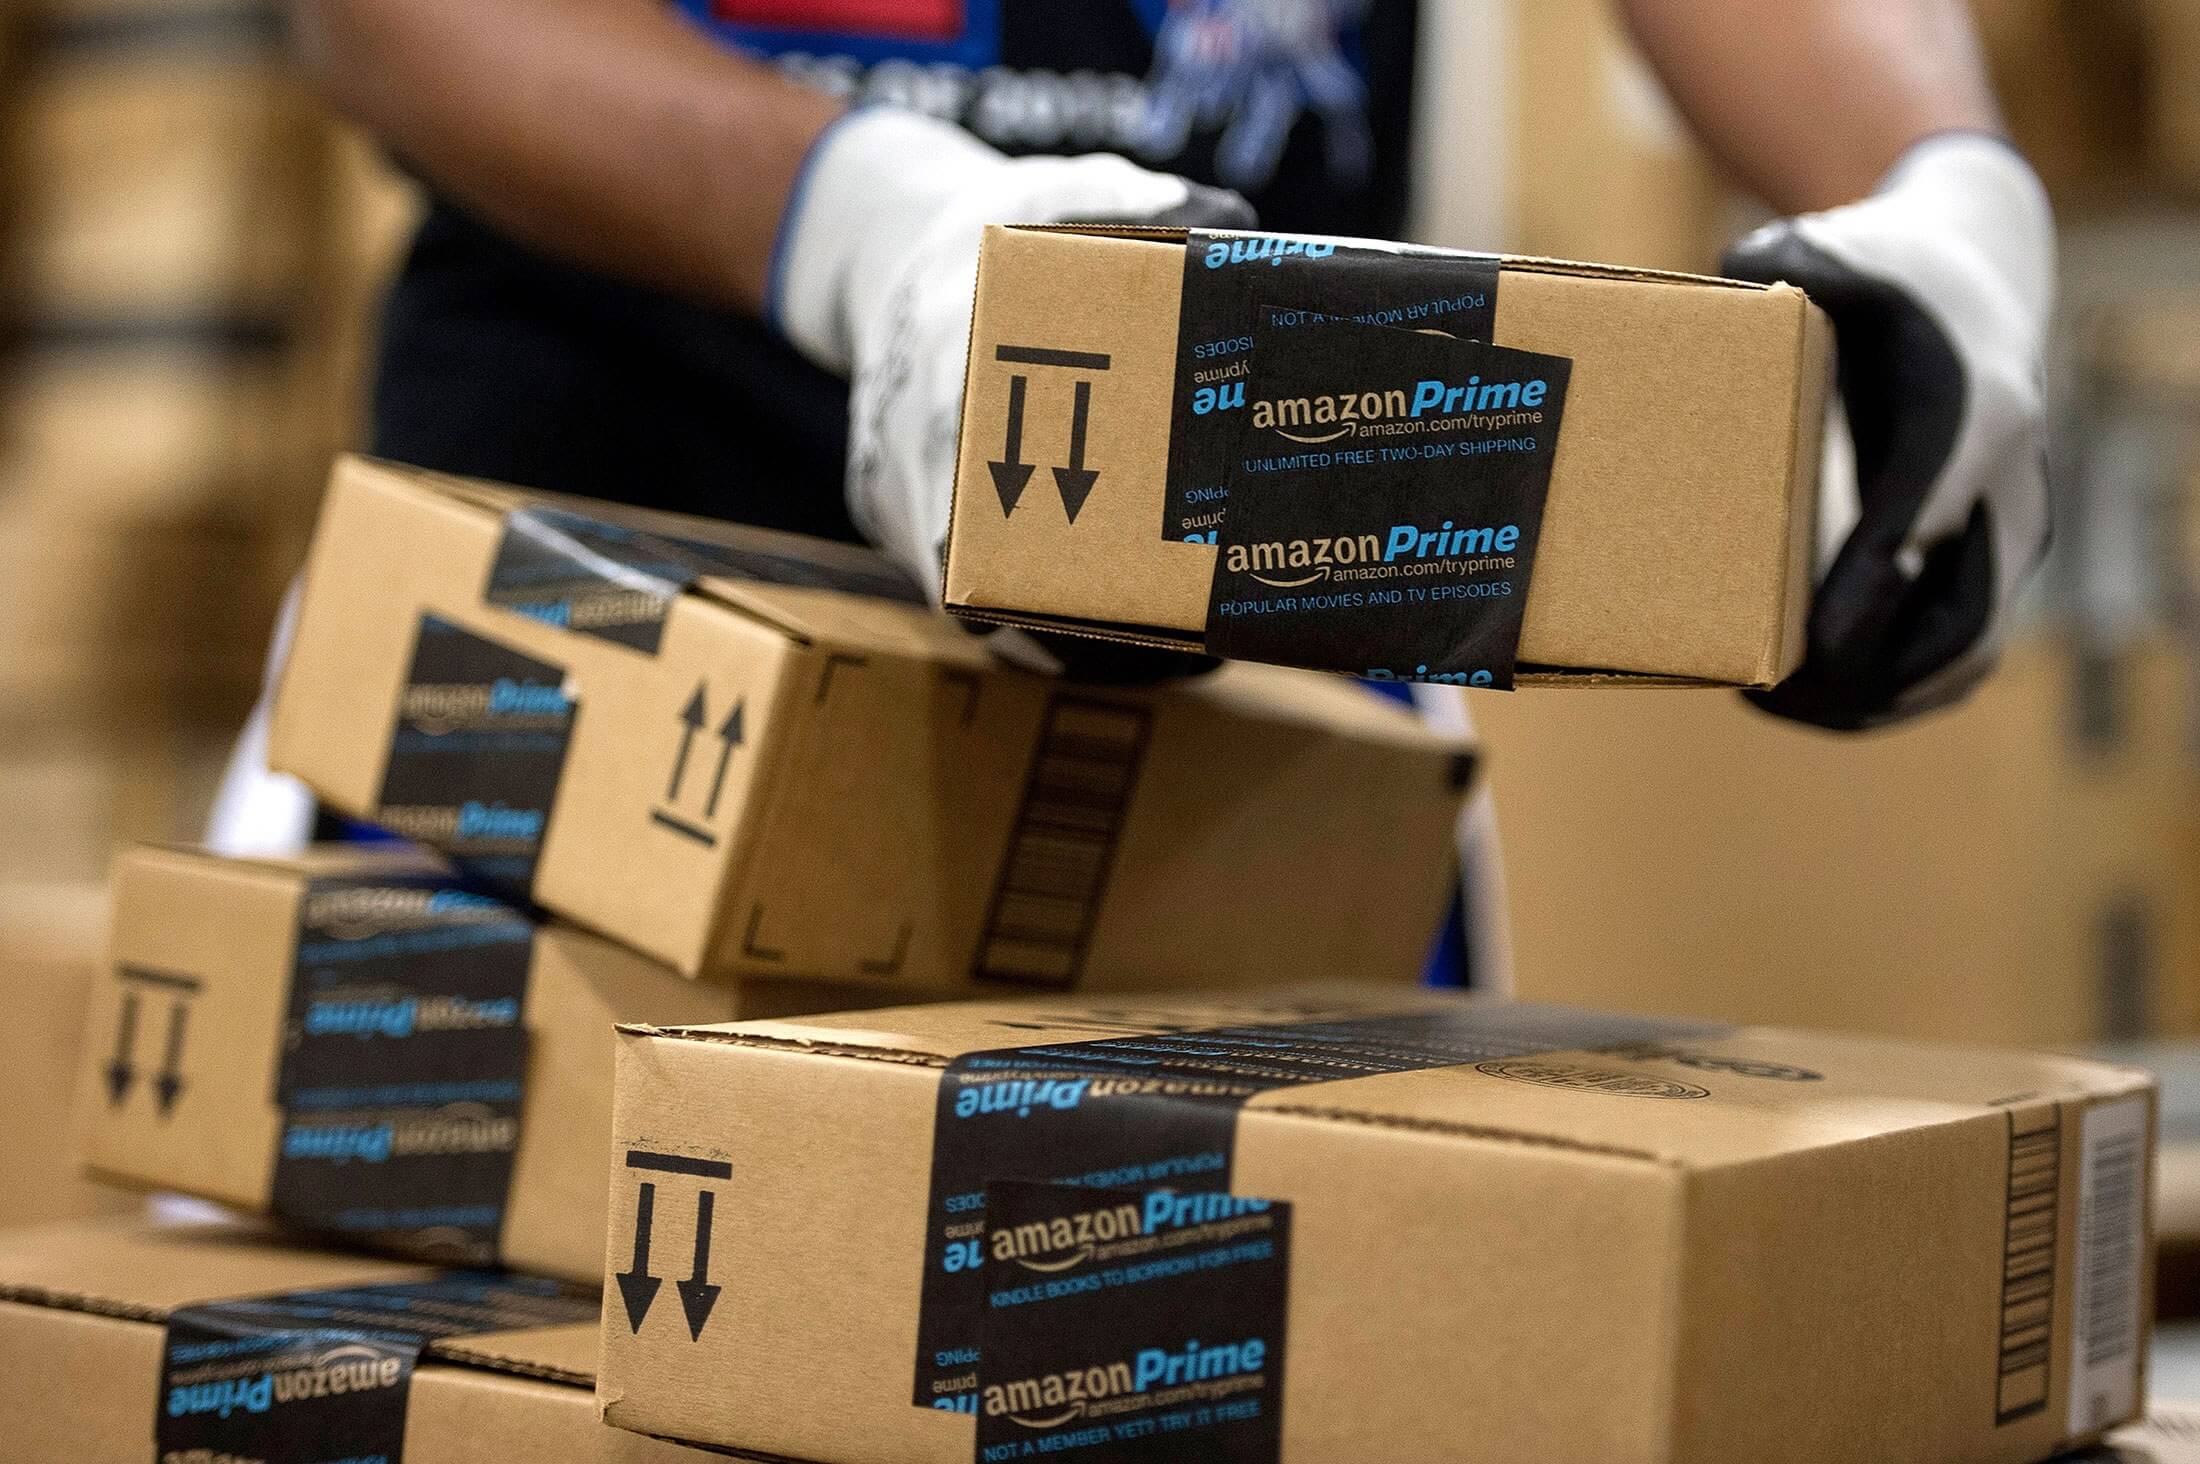 Amazon has another record-breaking holiday with 'tens of millions' of new Prime subscribers